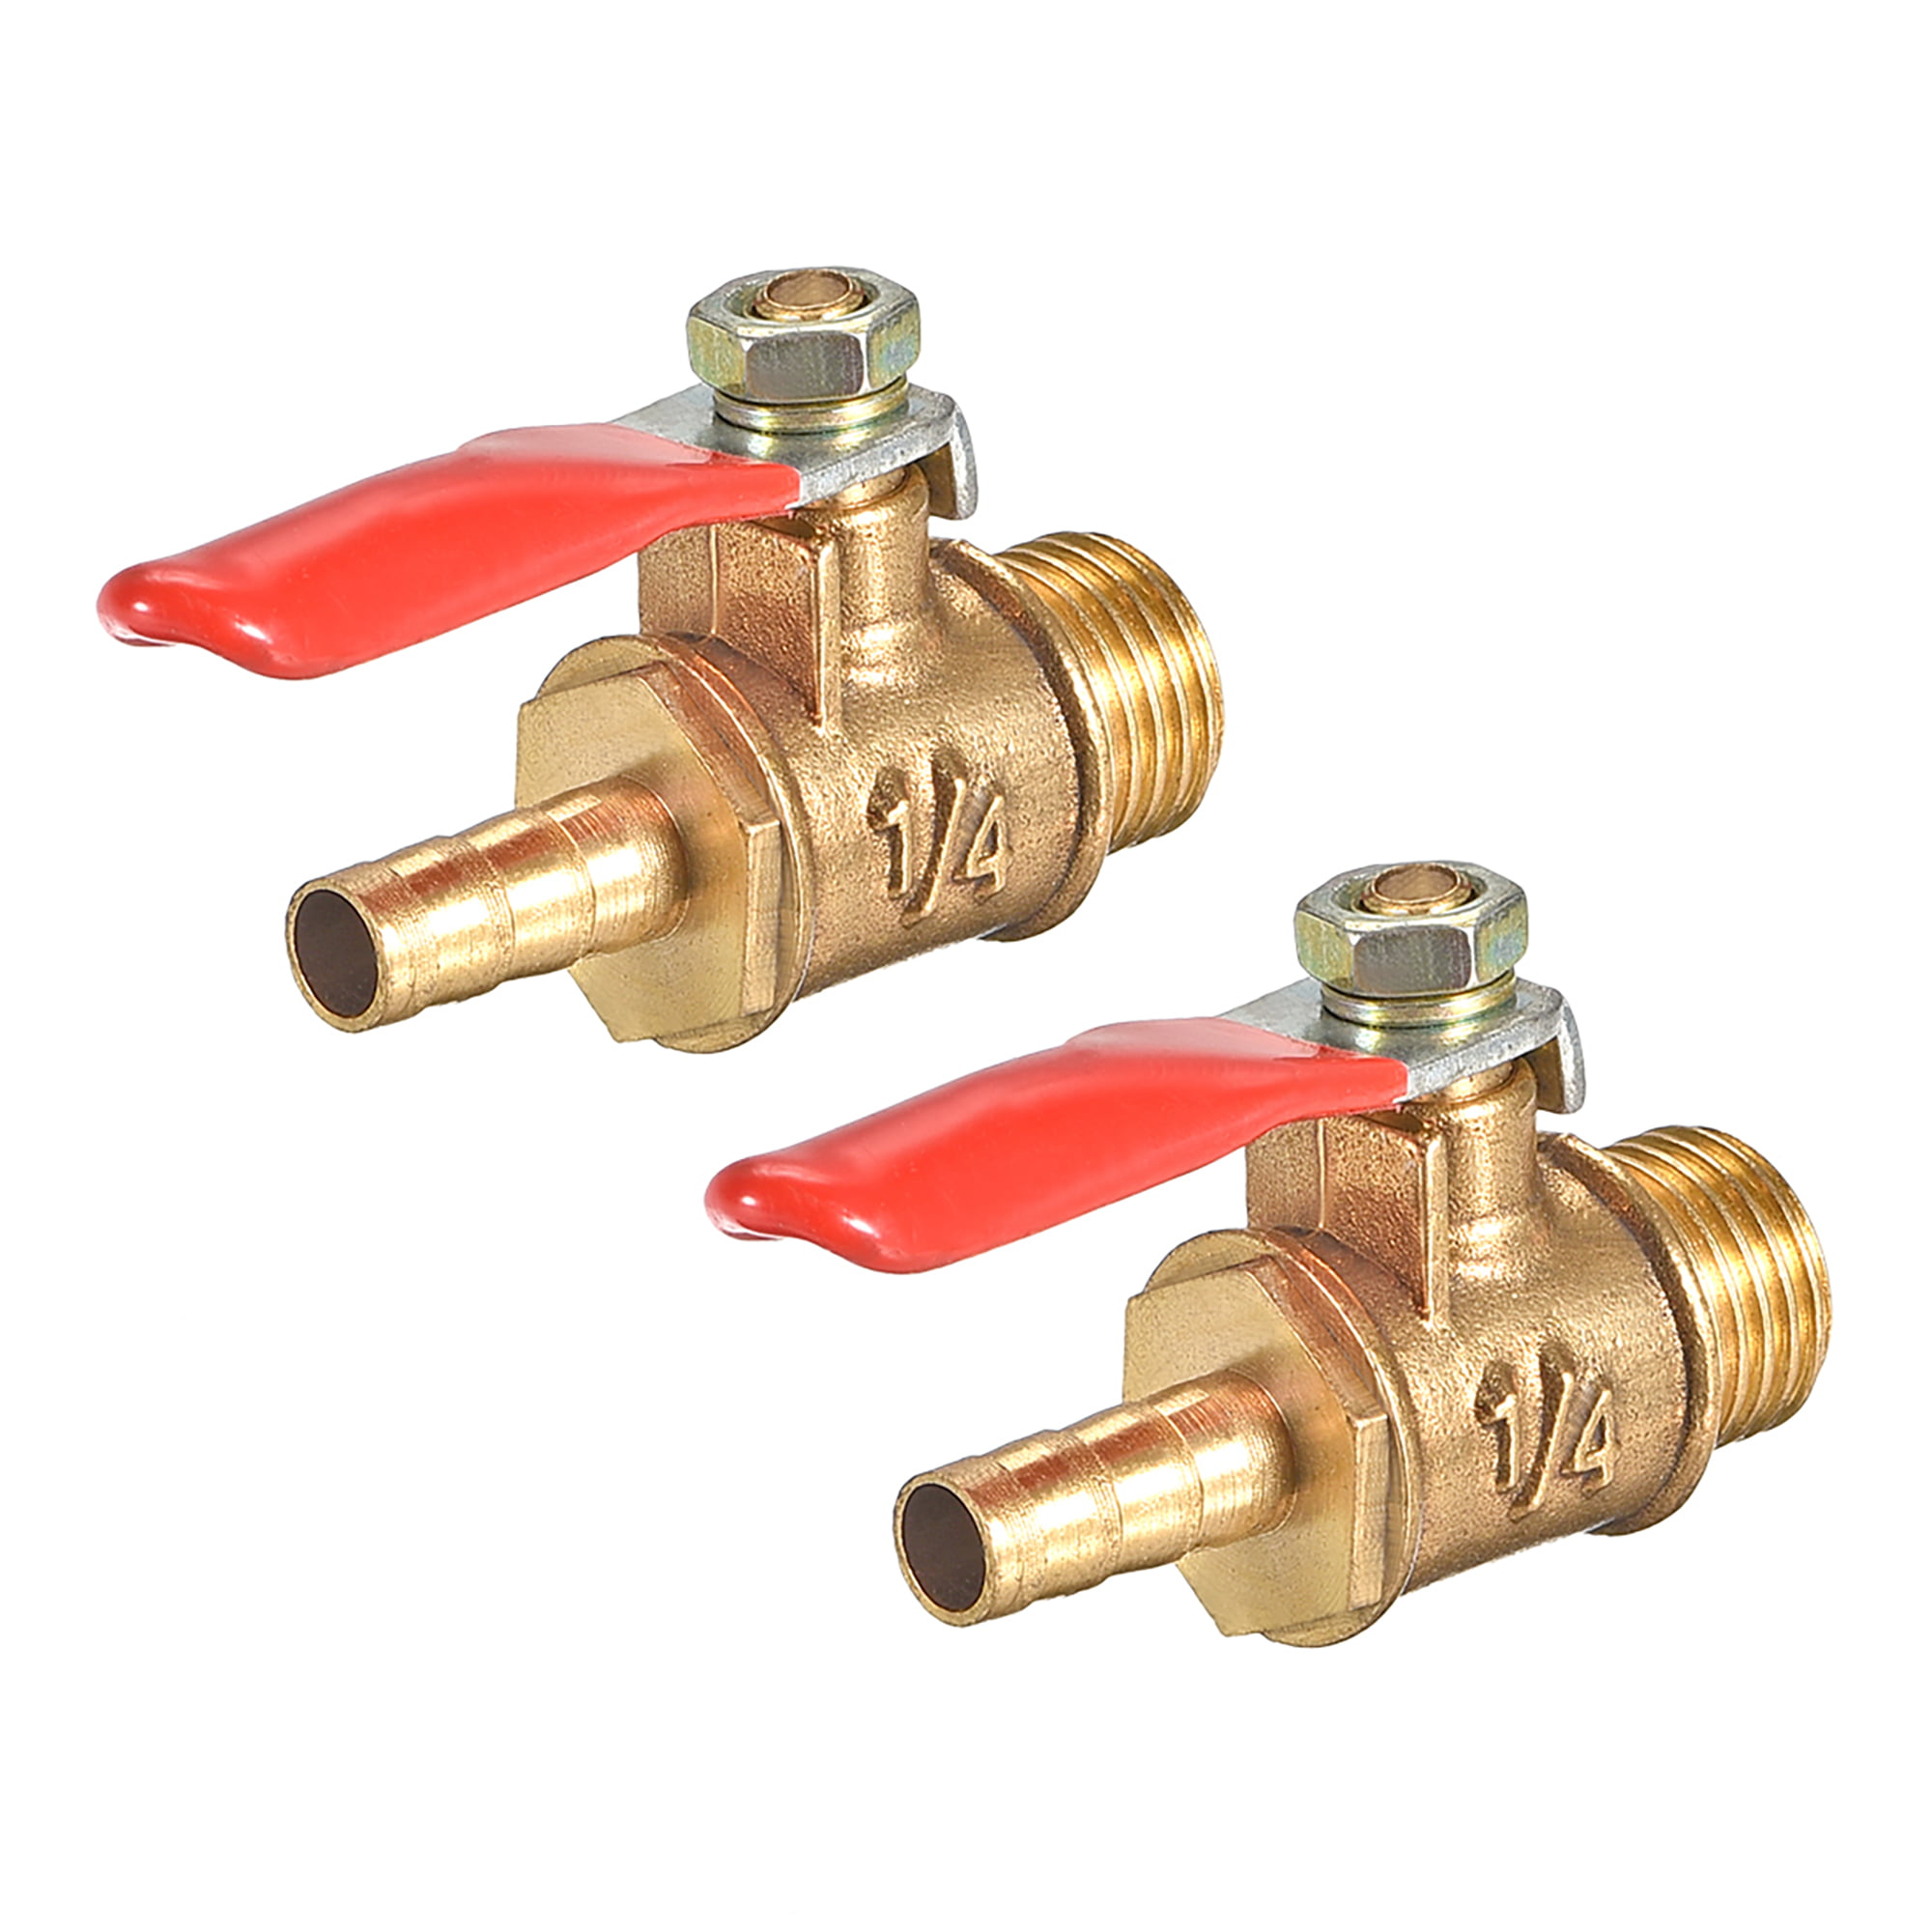 Brass Air Ball Valve Shut Off Switch G1/2 Male to 1/2" Hose Barb Pipe 2Pcs 